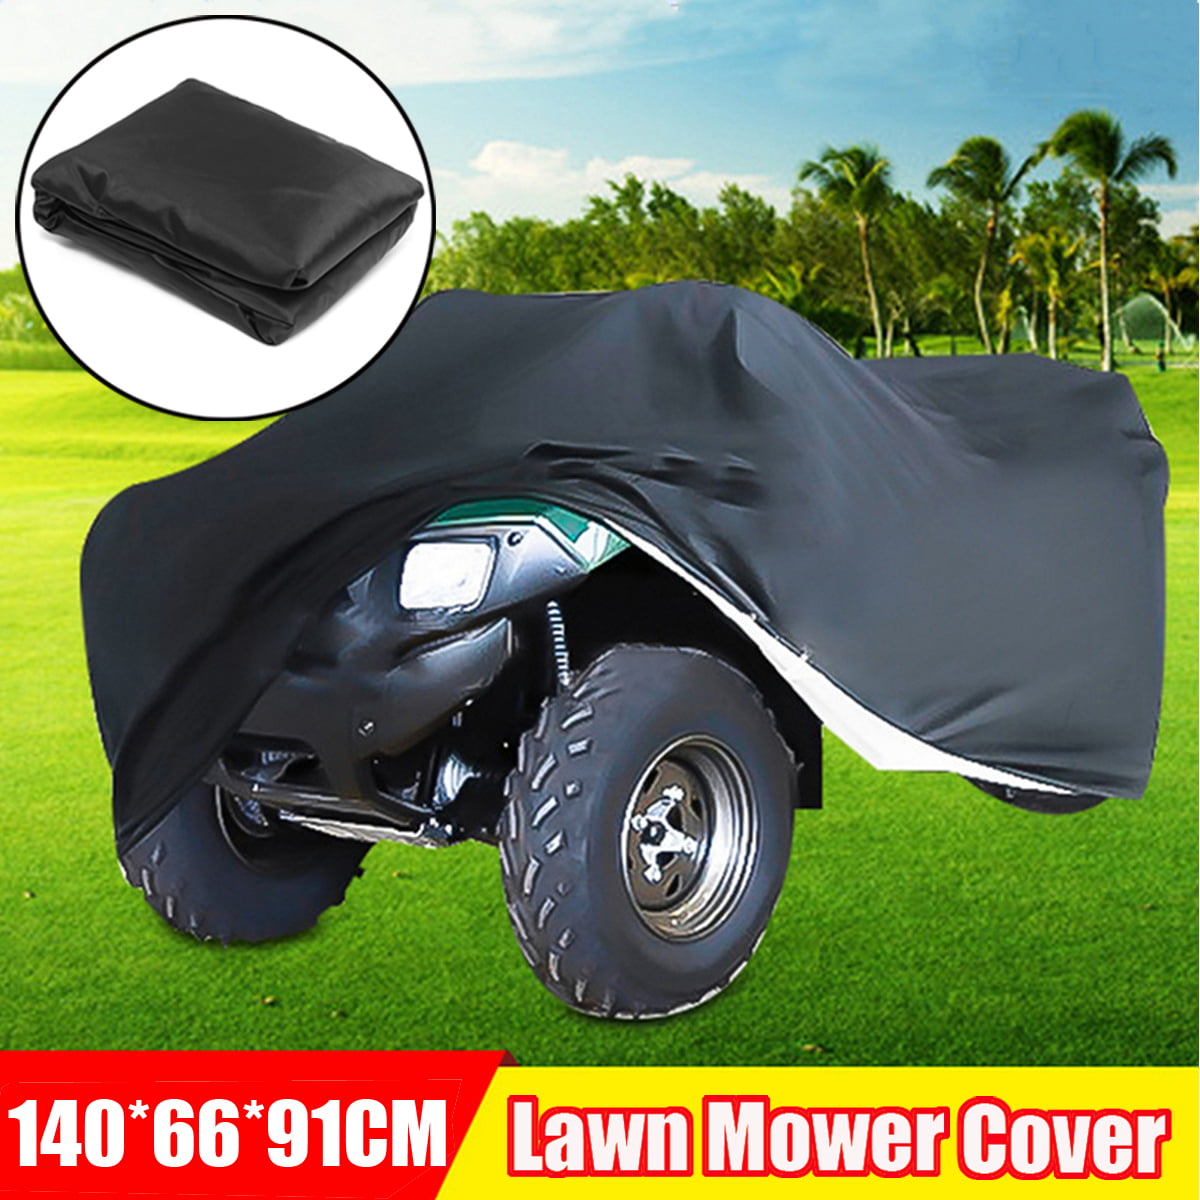 82 L x 50 W x 47 H North East Harbor Deluxe Riding Lawn Mower Tractor Cover Fits Decks up to 62 190T Polyester Taffeta PA Coated Water and UV Resistant Storage Cover Black 